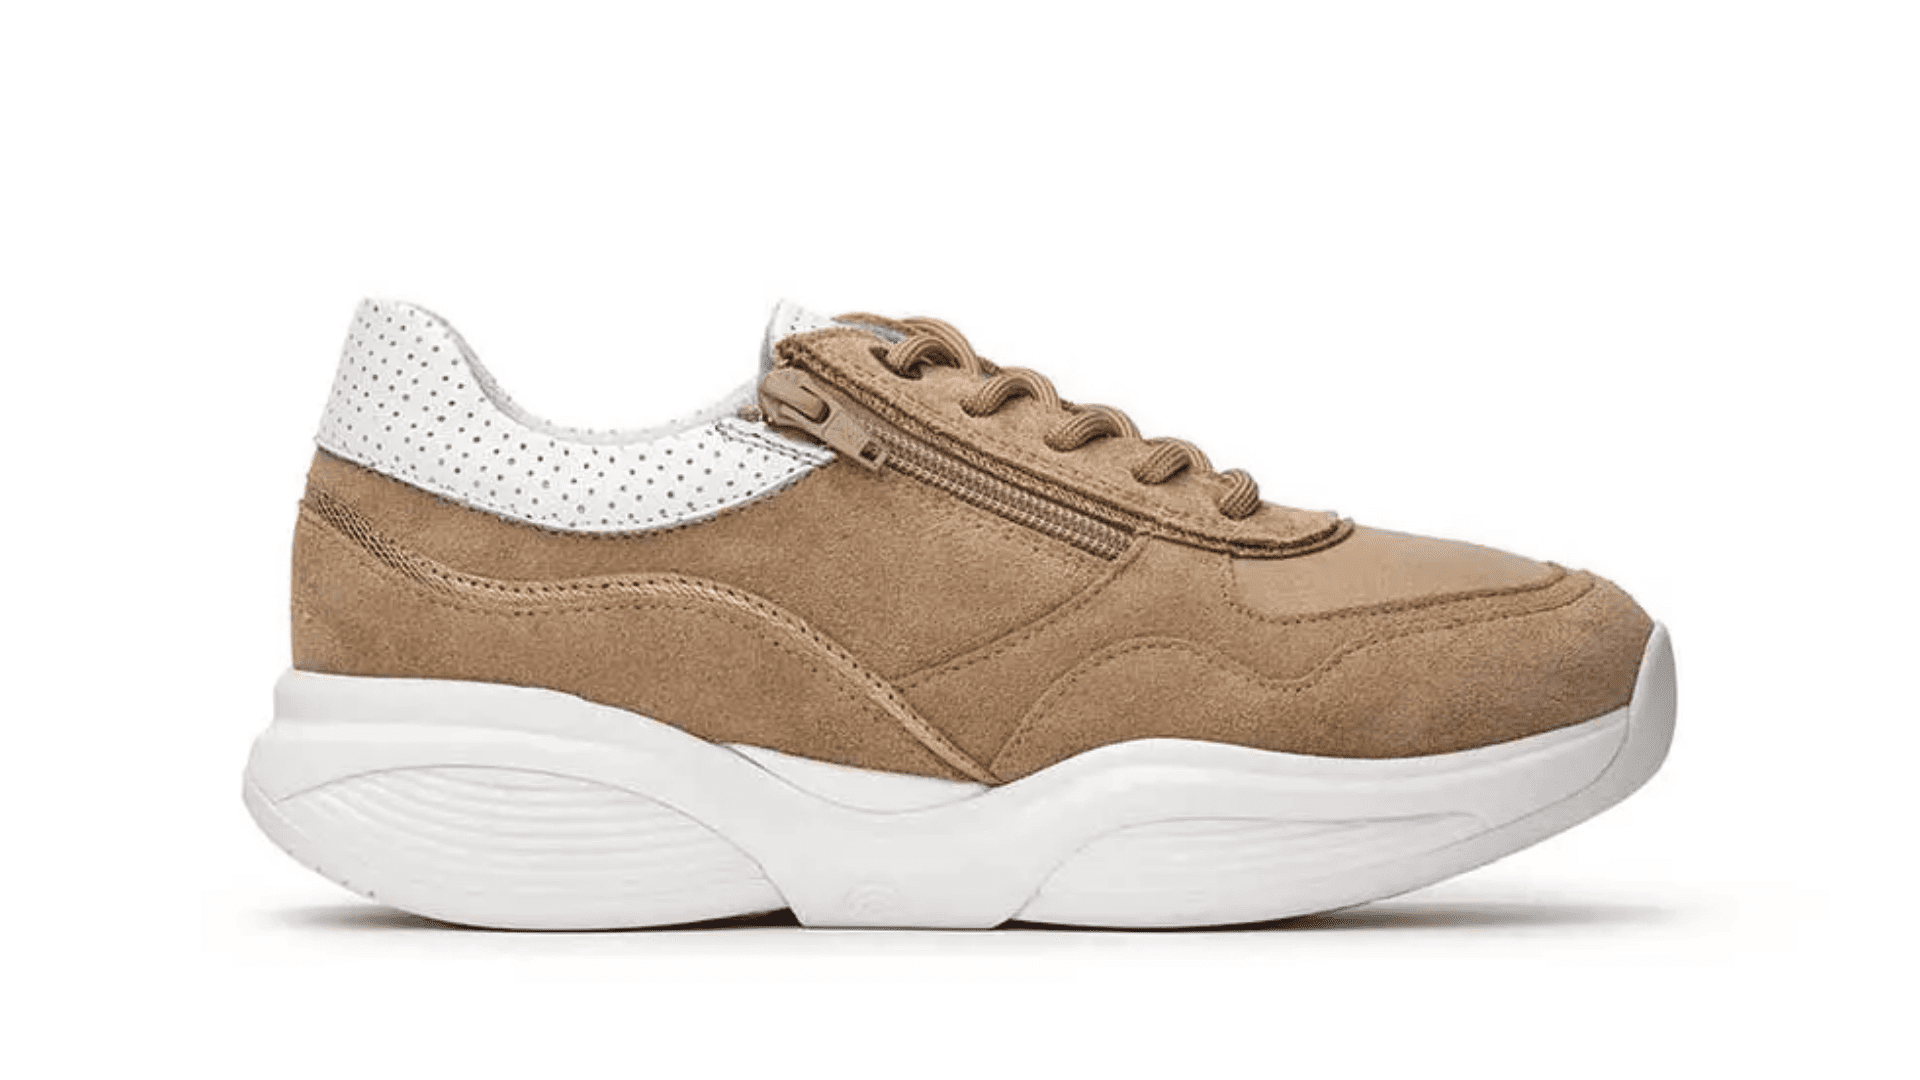 Beige Xsensible SWX11 shoes that can help people relieve their hallux rigidus symtpoms.